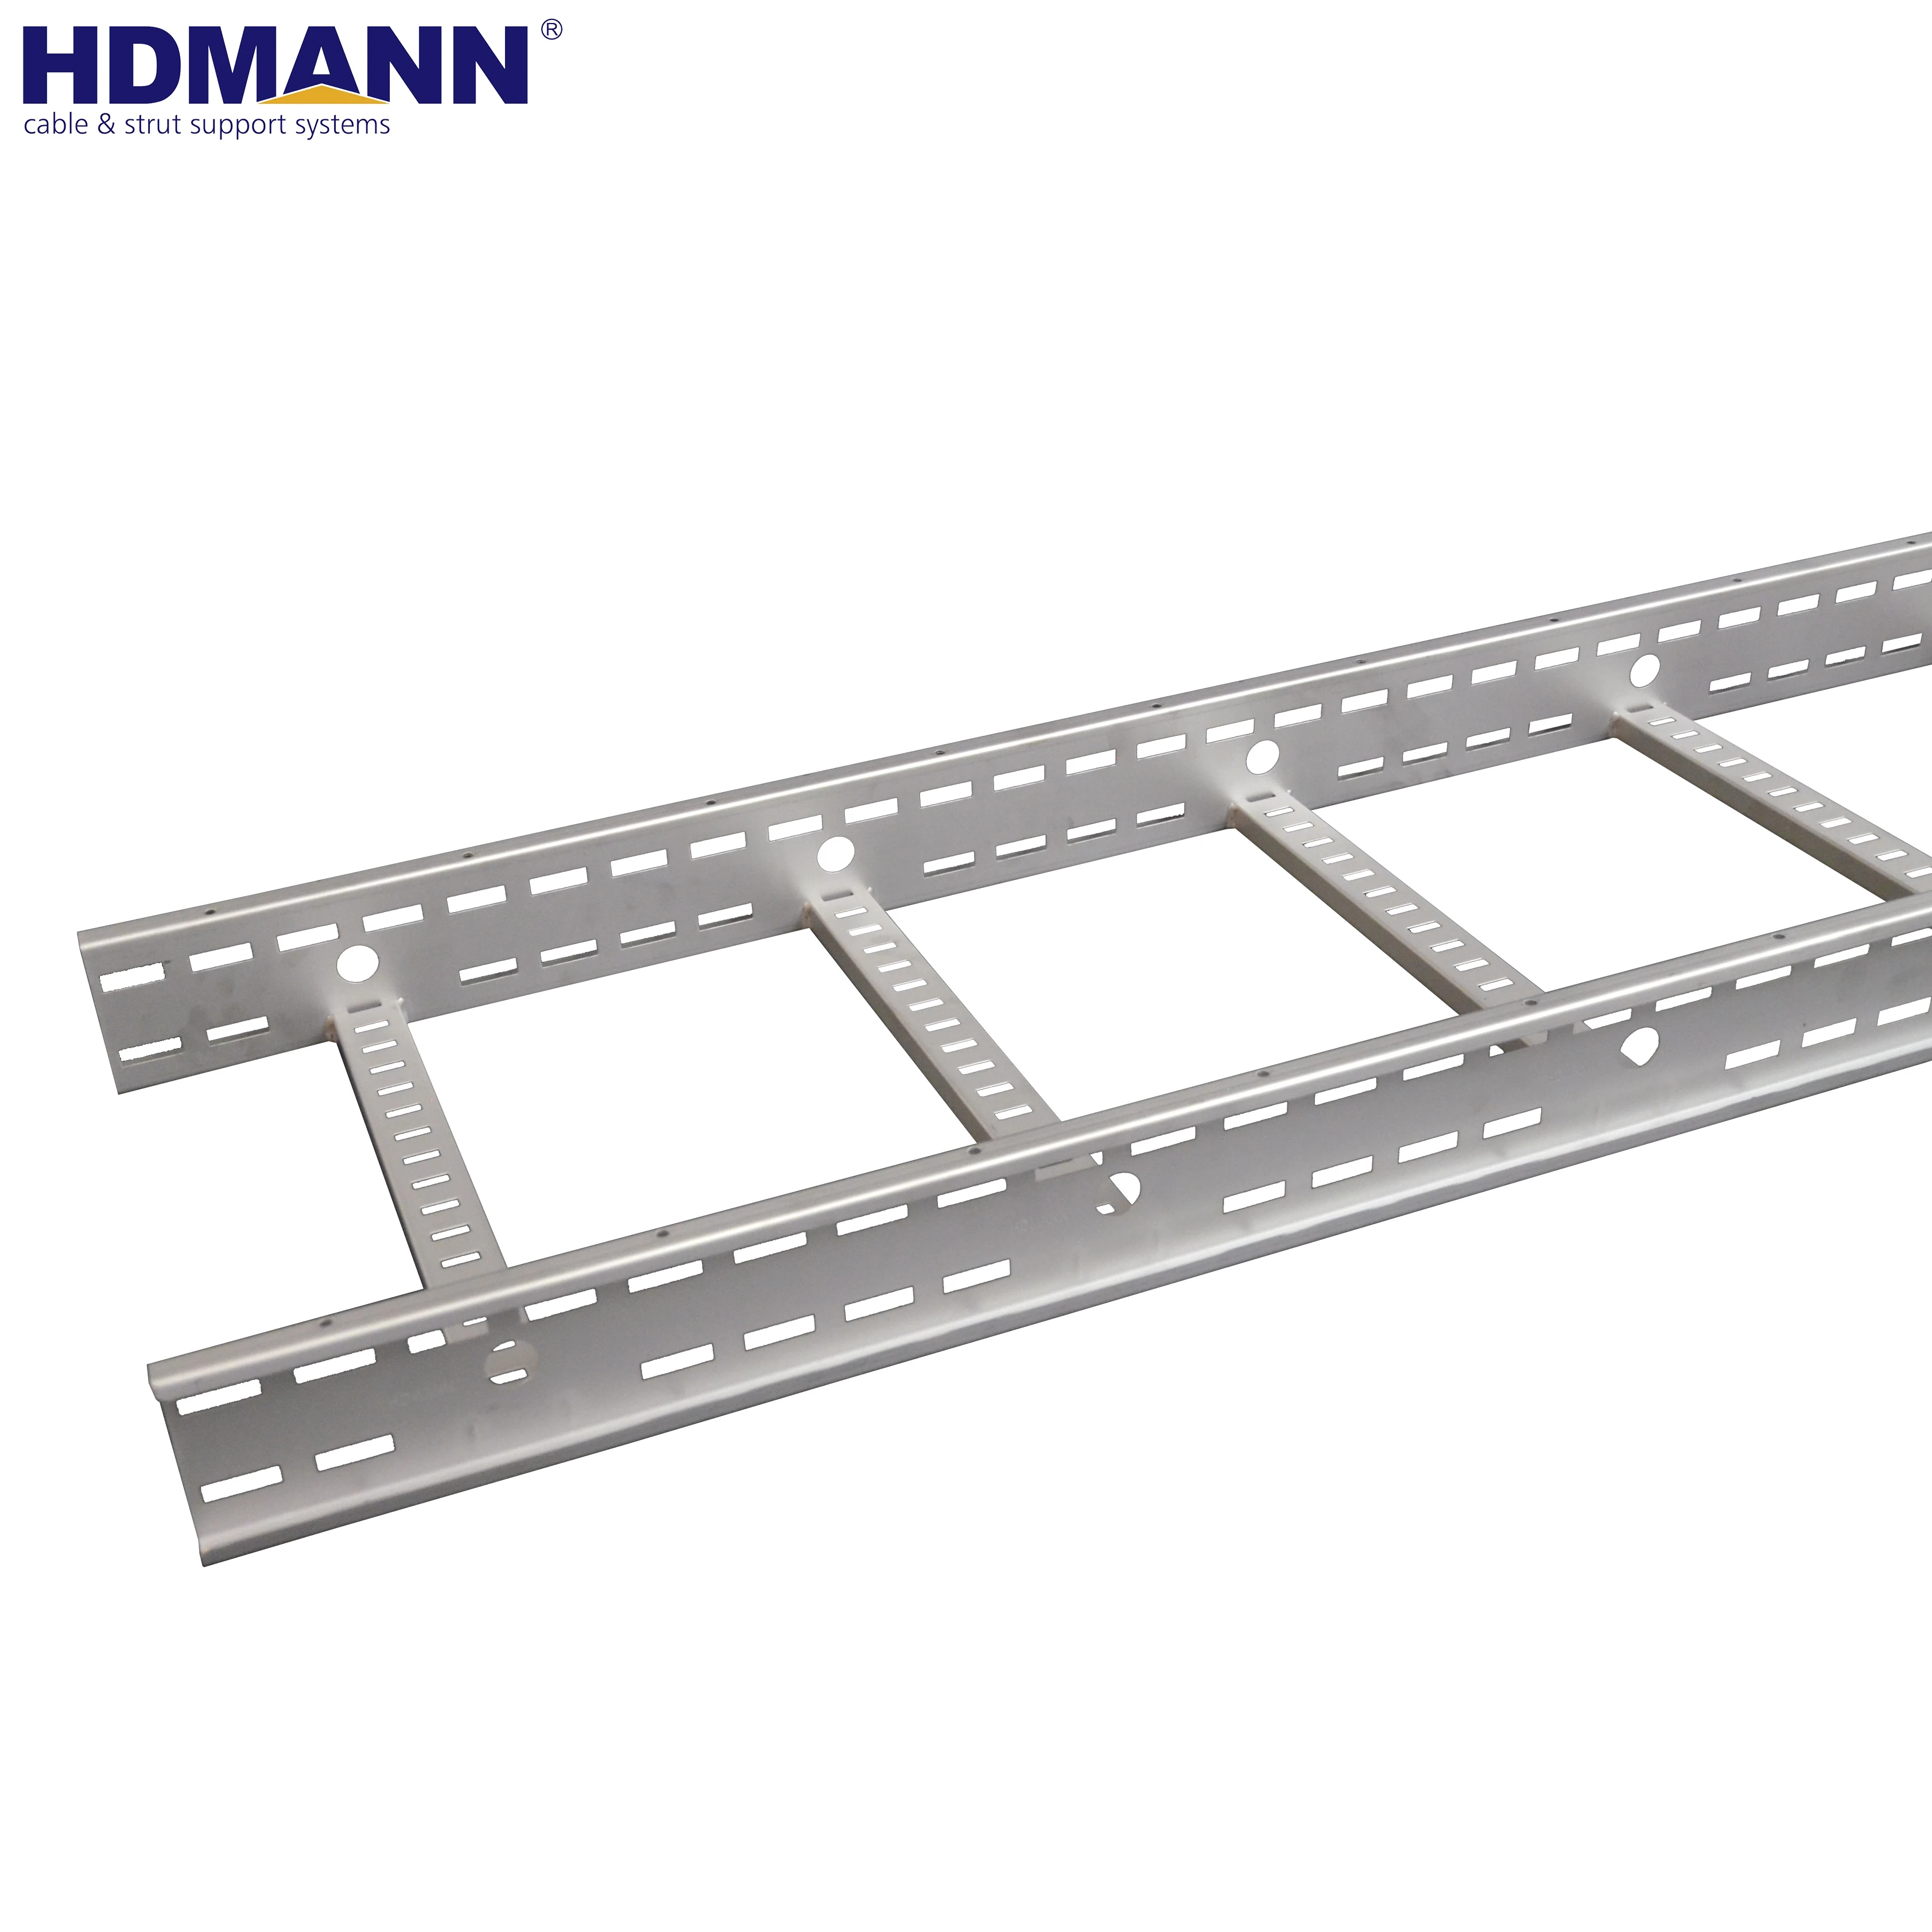 hot sale  good  price   high   quality   Slotted Cable Ladder Cable Tray